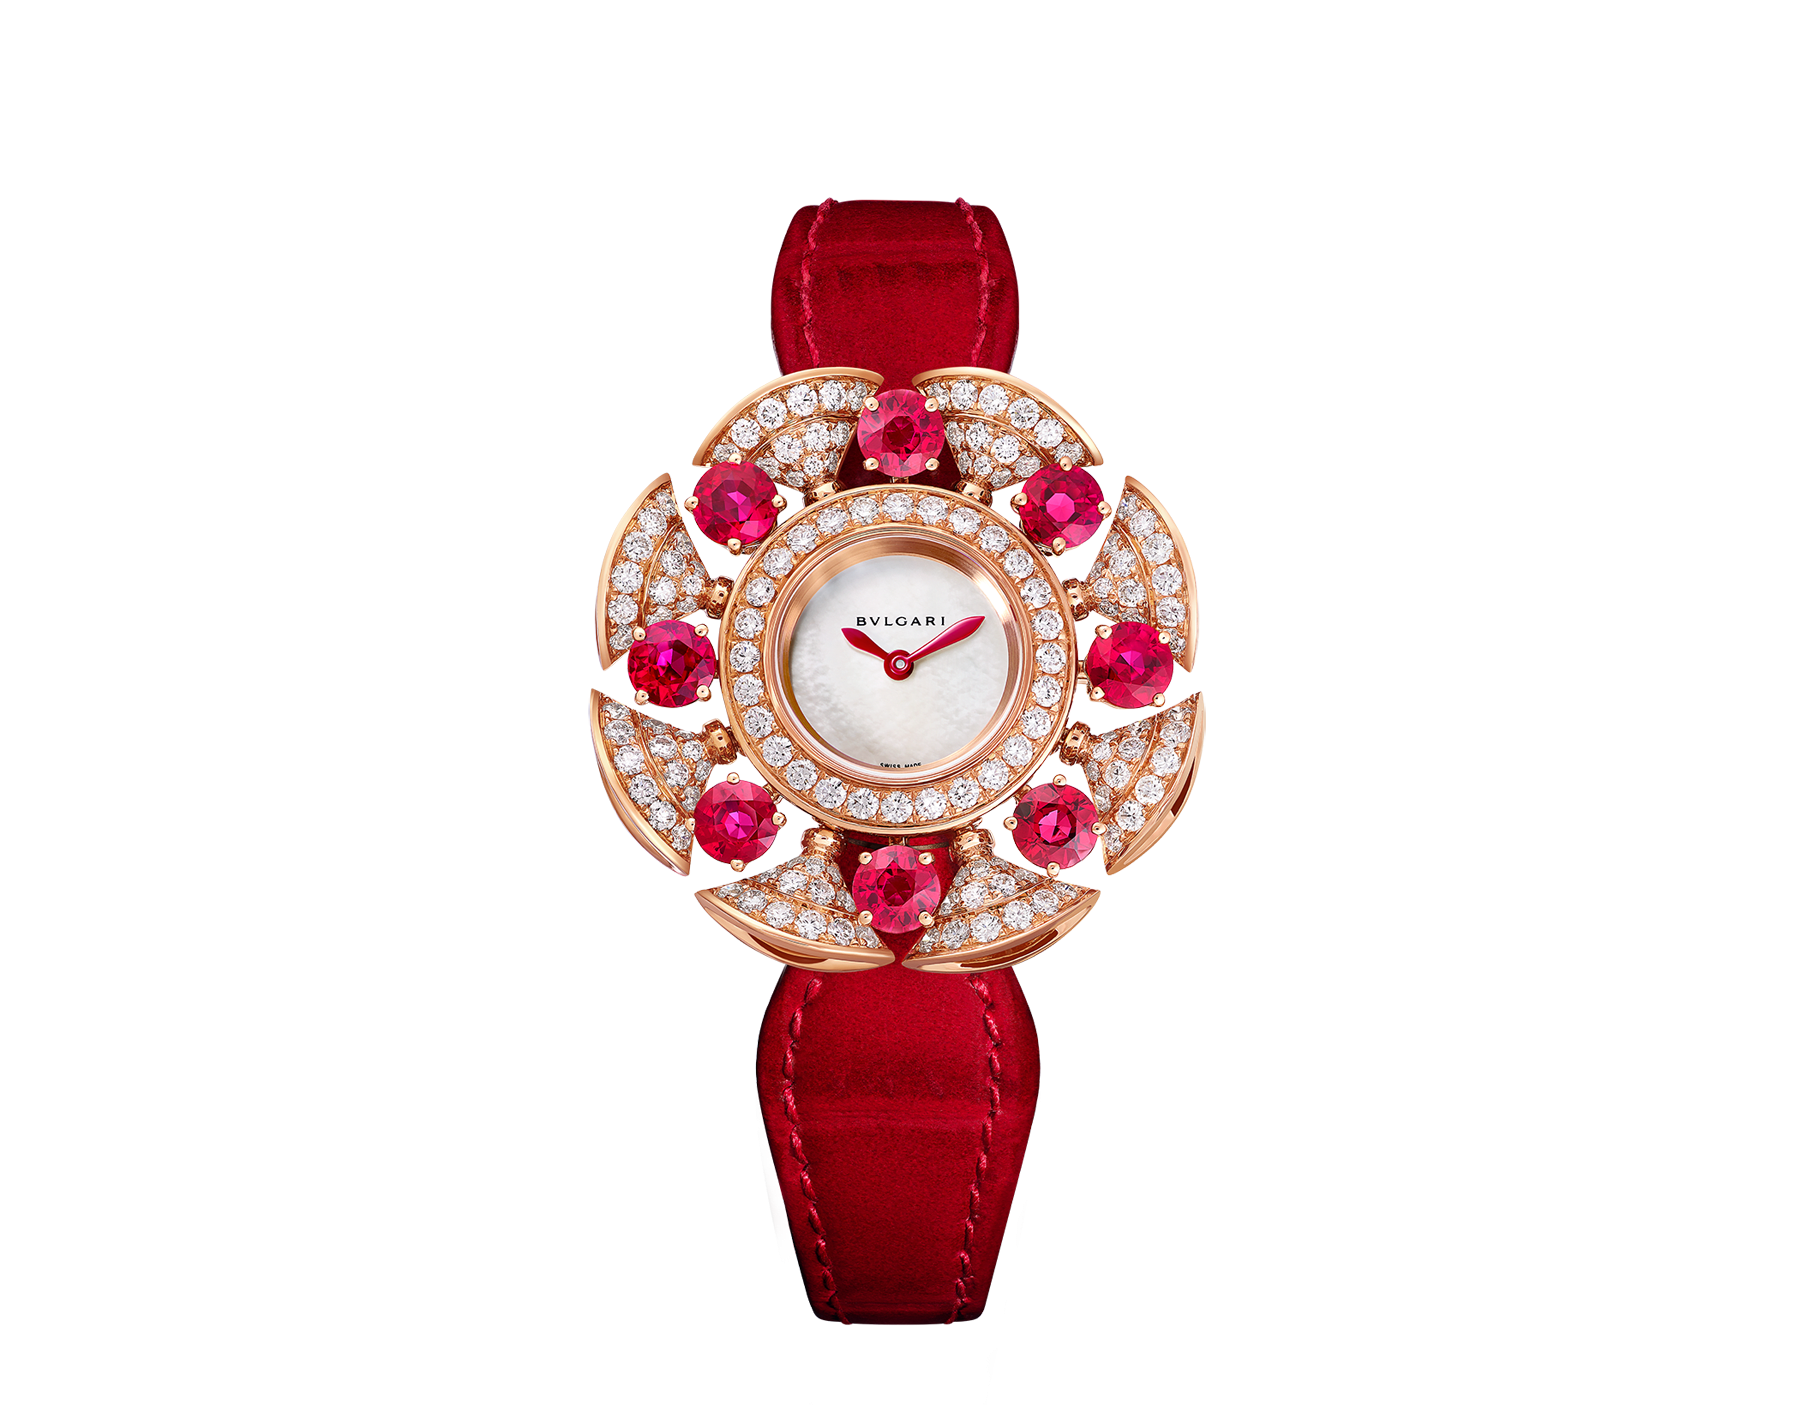 DIVAS' DREAM High Jewellery watch with 18 kt rose gold case set with round brilliant-cut diamonds (F-G VVS, ~2 ct) and 8 brilliant-cut rubies (~3.6 ct), mother-of-pearl dial and red alligator bracelet. Water-resistant up to 30 metres. 103754 image 1